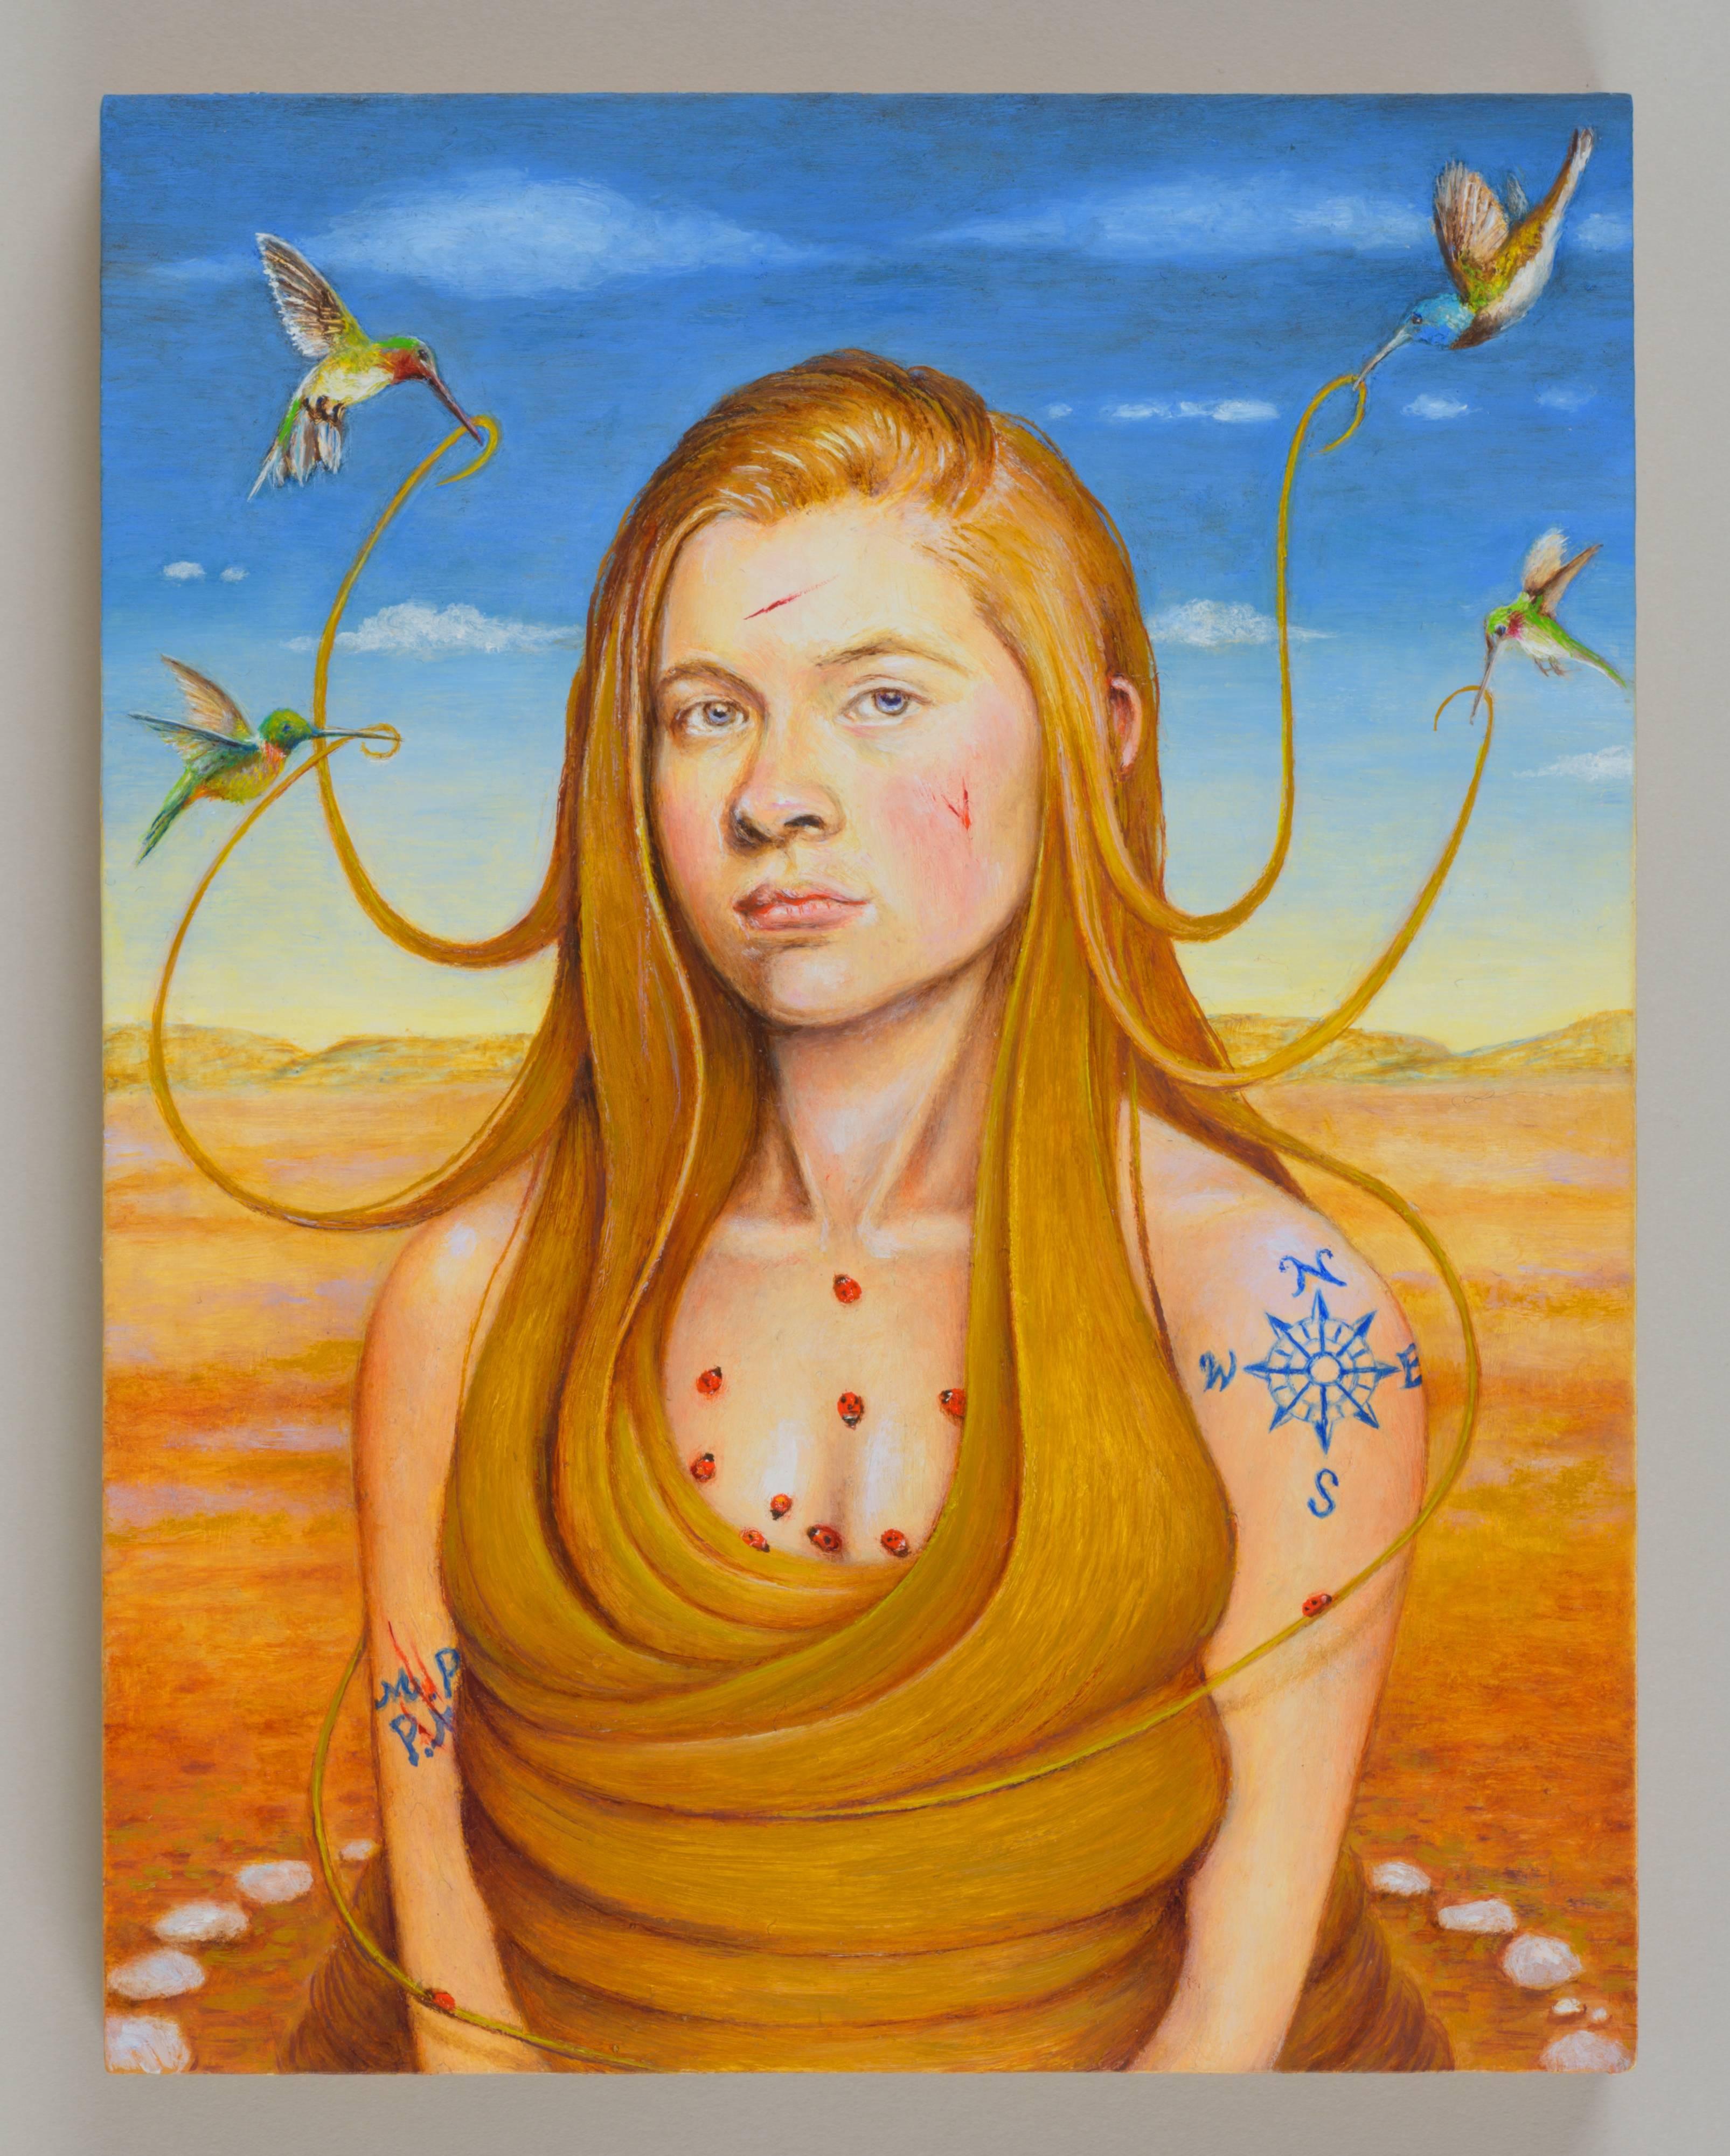 'She's Got a Ticket to Ride' features a long haired young woman with hummingbirds, who is shrouded in mystery. Tattooed and decorated with ladybugs and sitting within a ring of stones. The small painting is 7 x 5 1/2 inches, framed 8 1/2 x 7 x 3 1/2